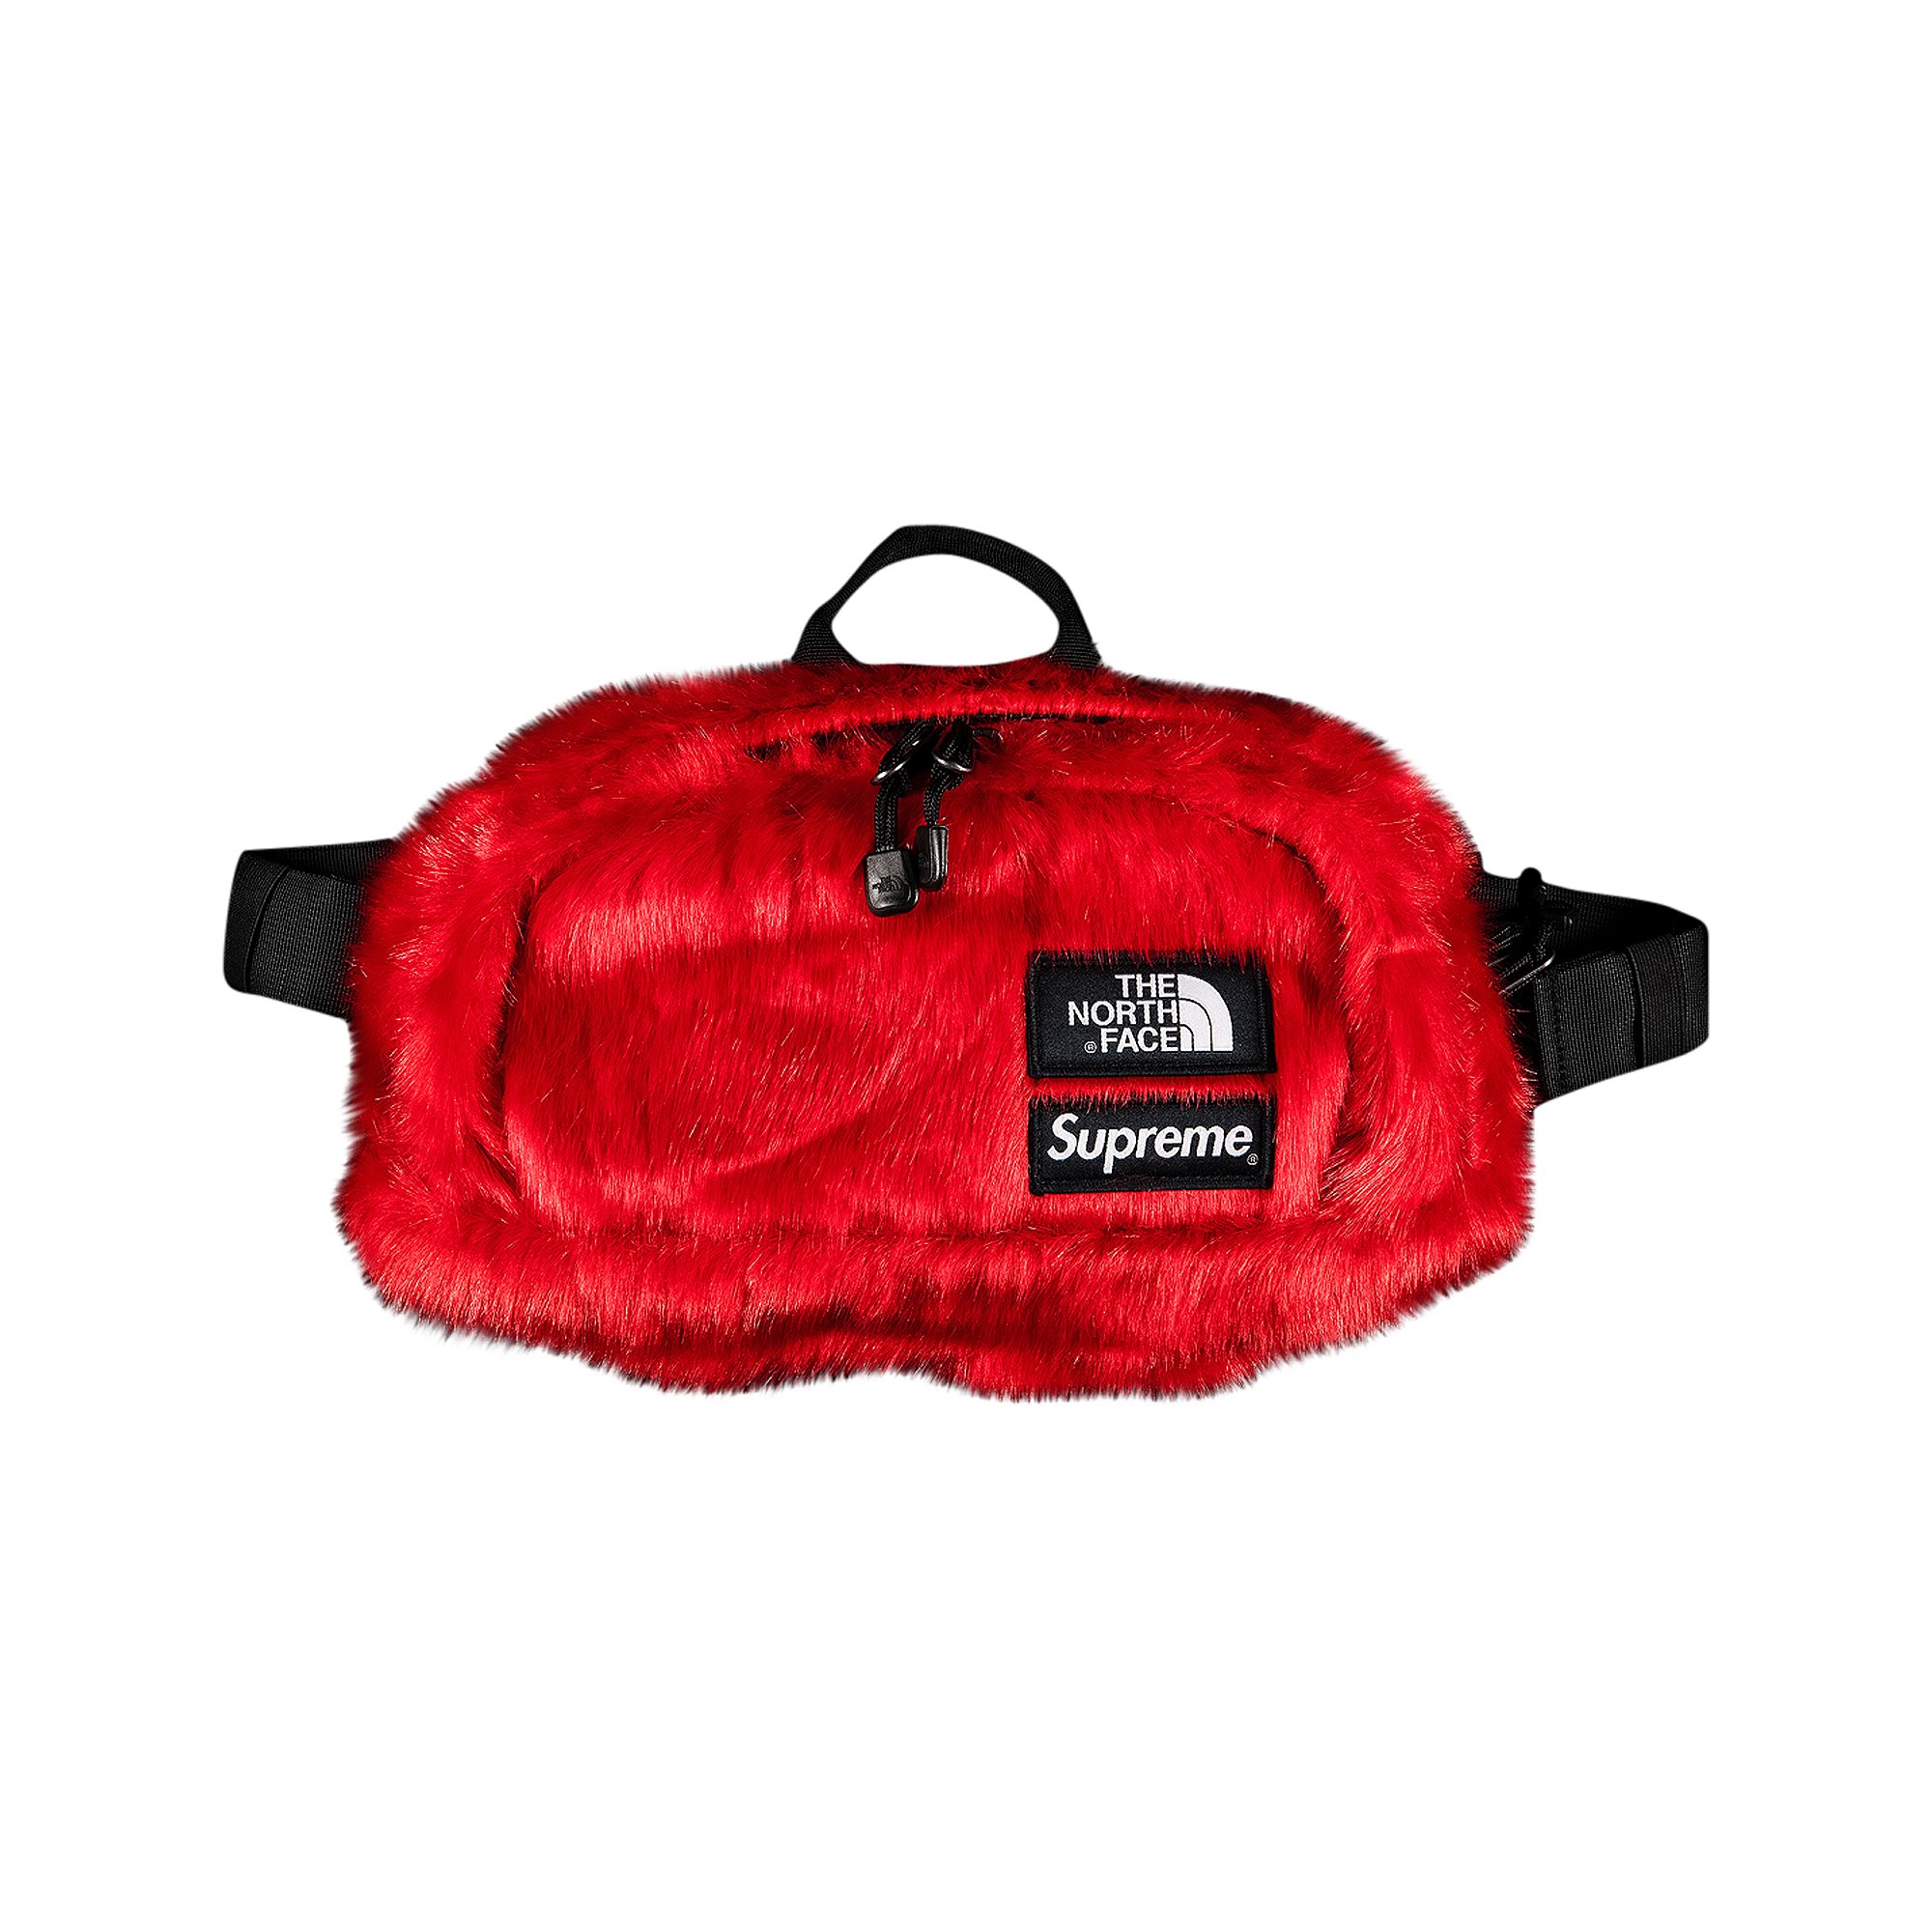 Buy Supreme x The North Face Faux Fur Waist Bag 'Red' - FW20B16 ...